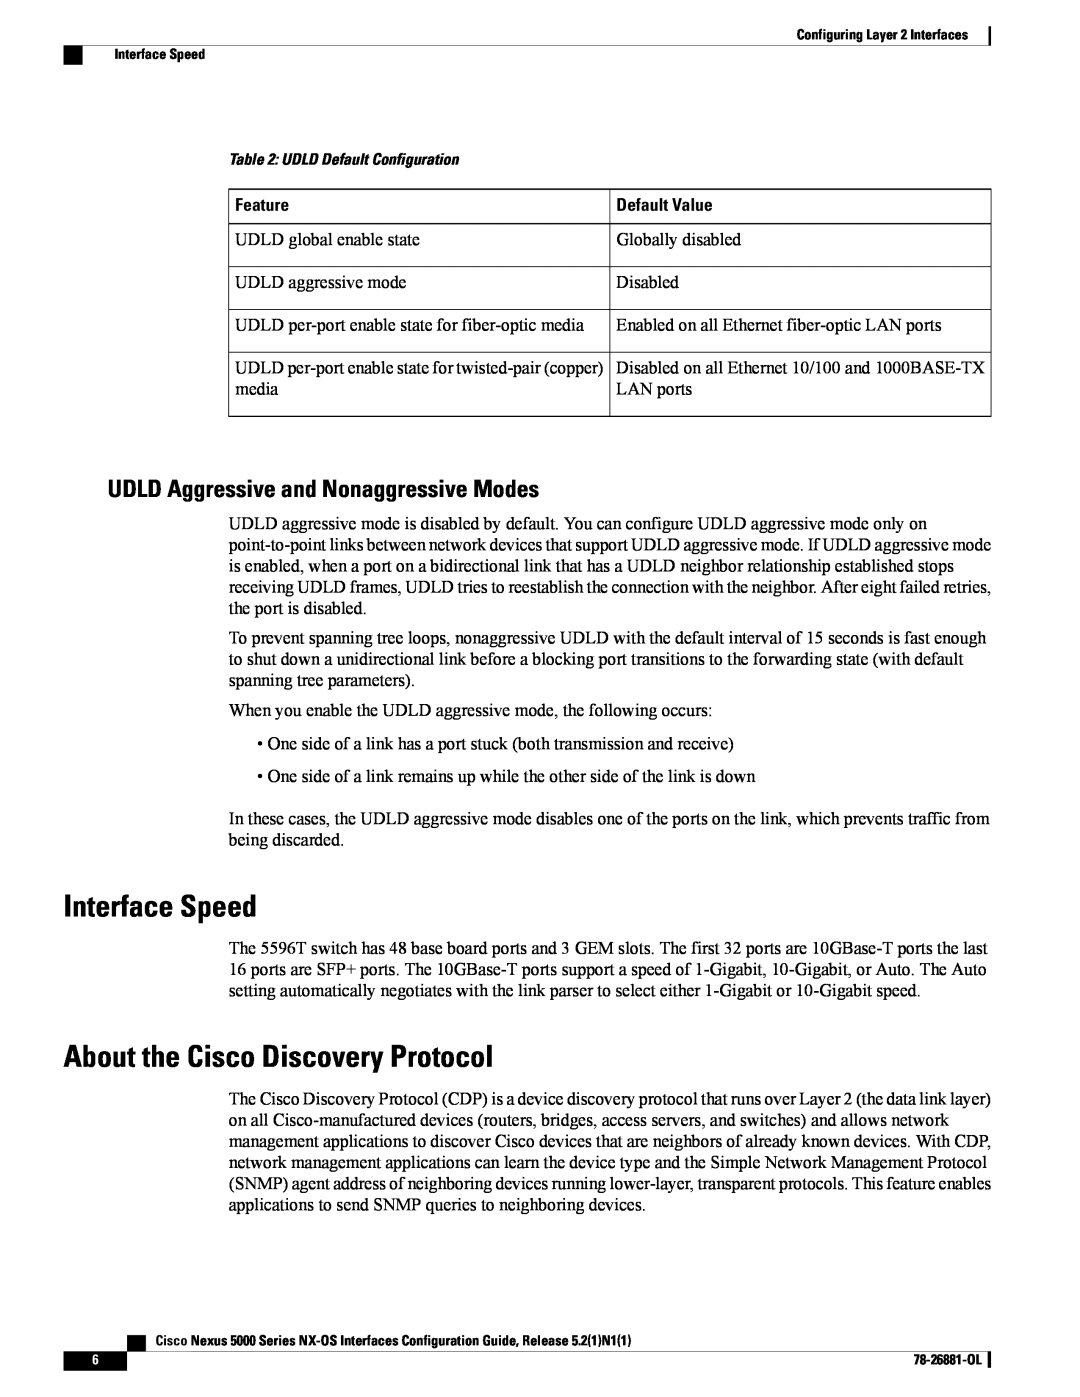 Cisco Systems N5KC5596TFA Interface Speed, About the Cisco Discovery Protocol, UDLD Aggressive and Nonaggressive Modes 